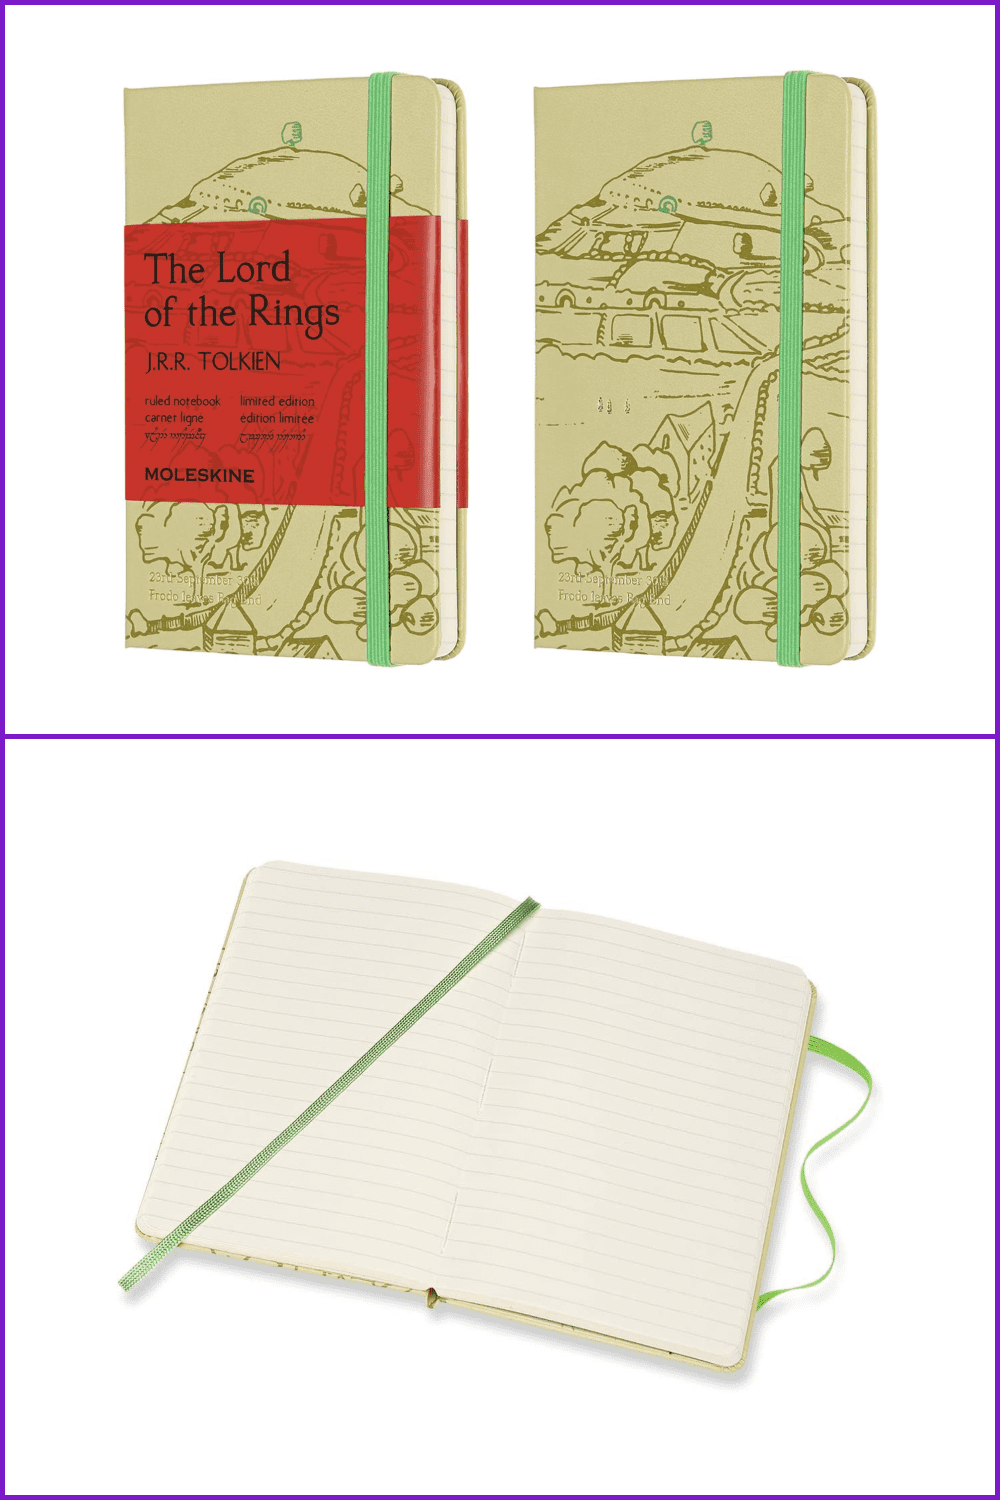 Collage of images of a notebook with images of the Lord of the Rings on the cover.